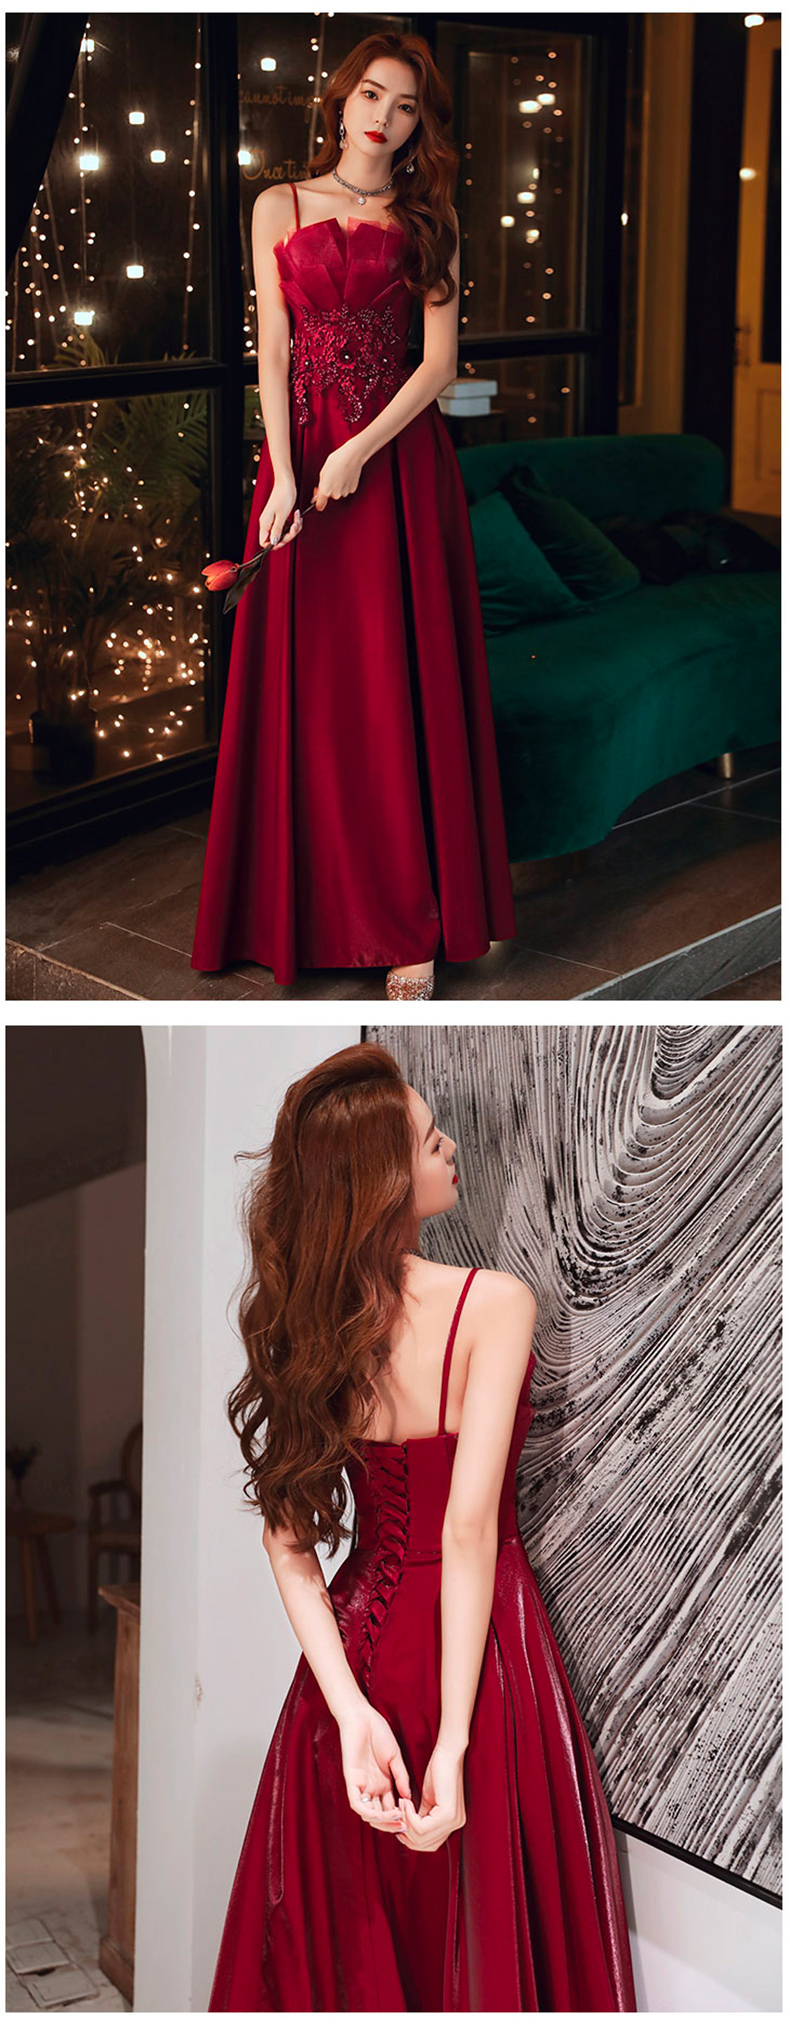 Simple Sleeveless Burgundy Slip Evening Gown Party Dress13